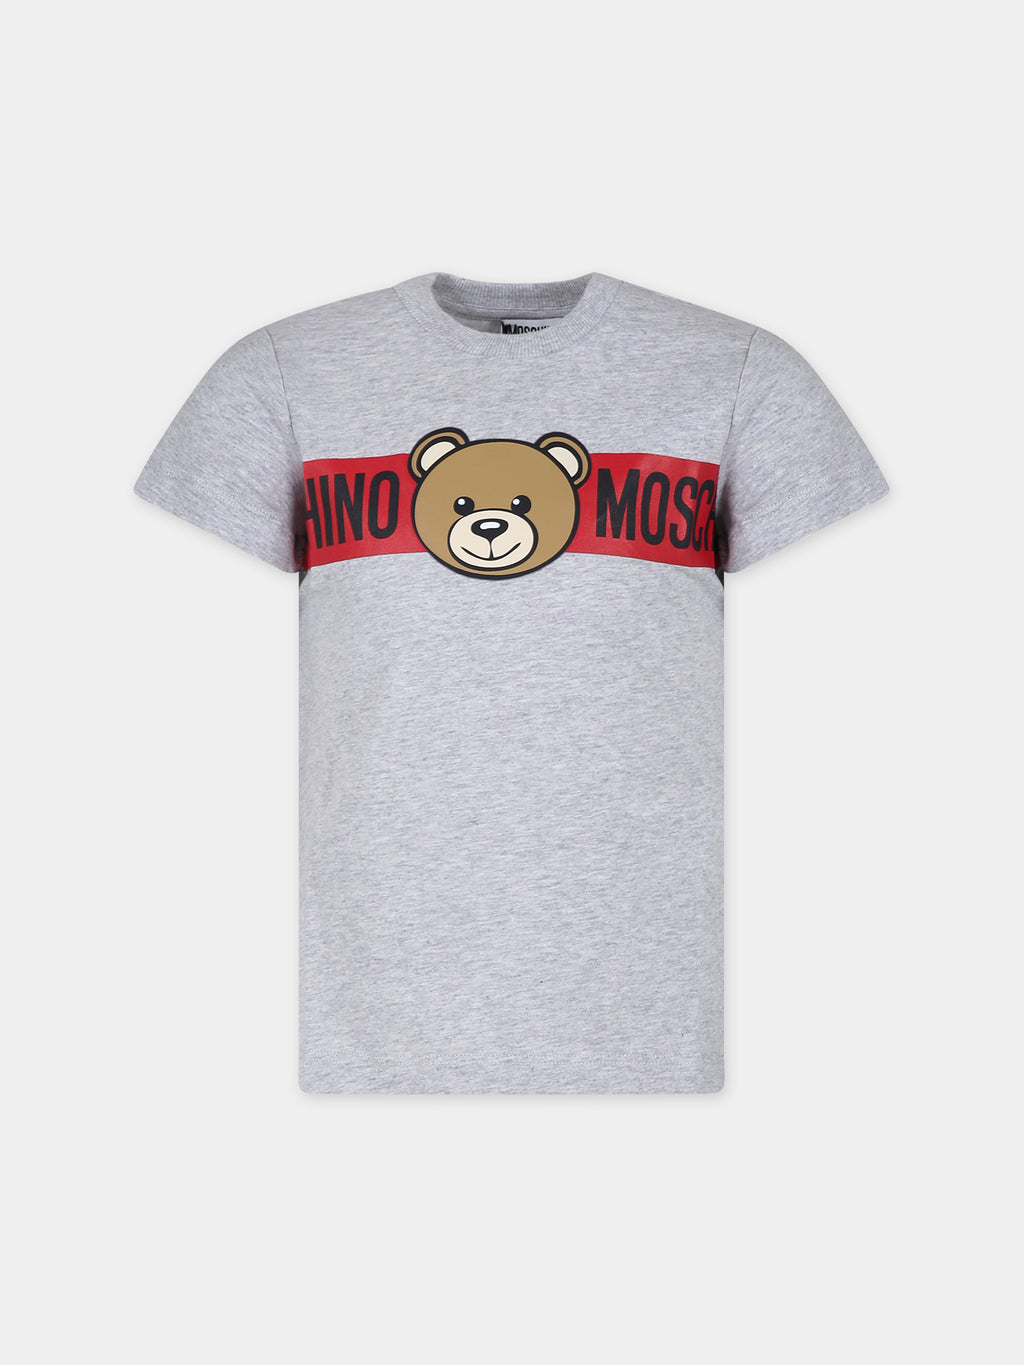 Grey t-shirt for kids with Teddy Bear and logo